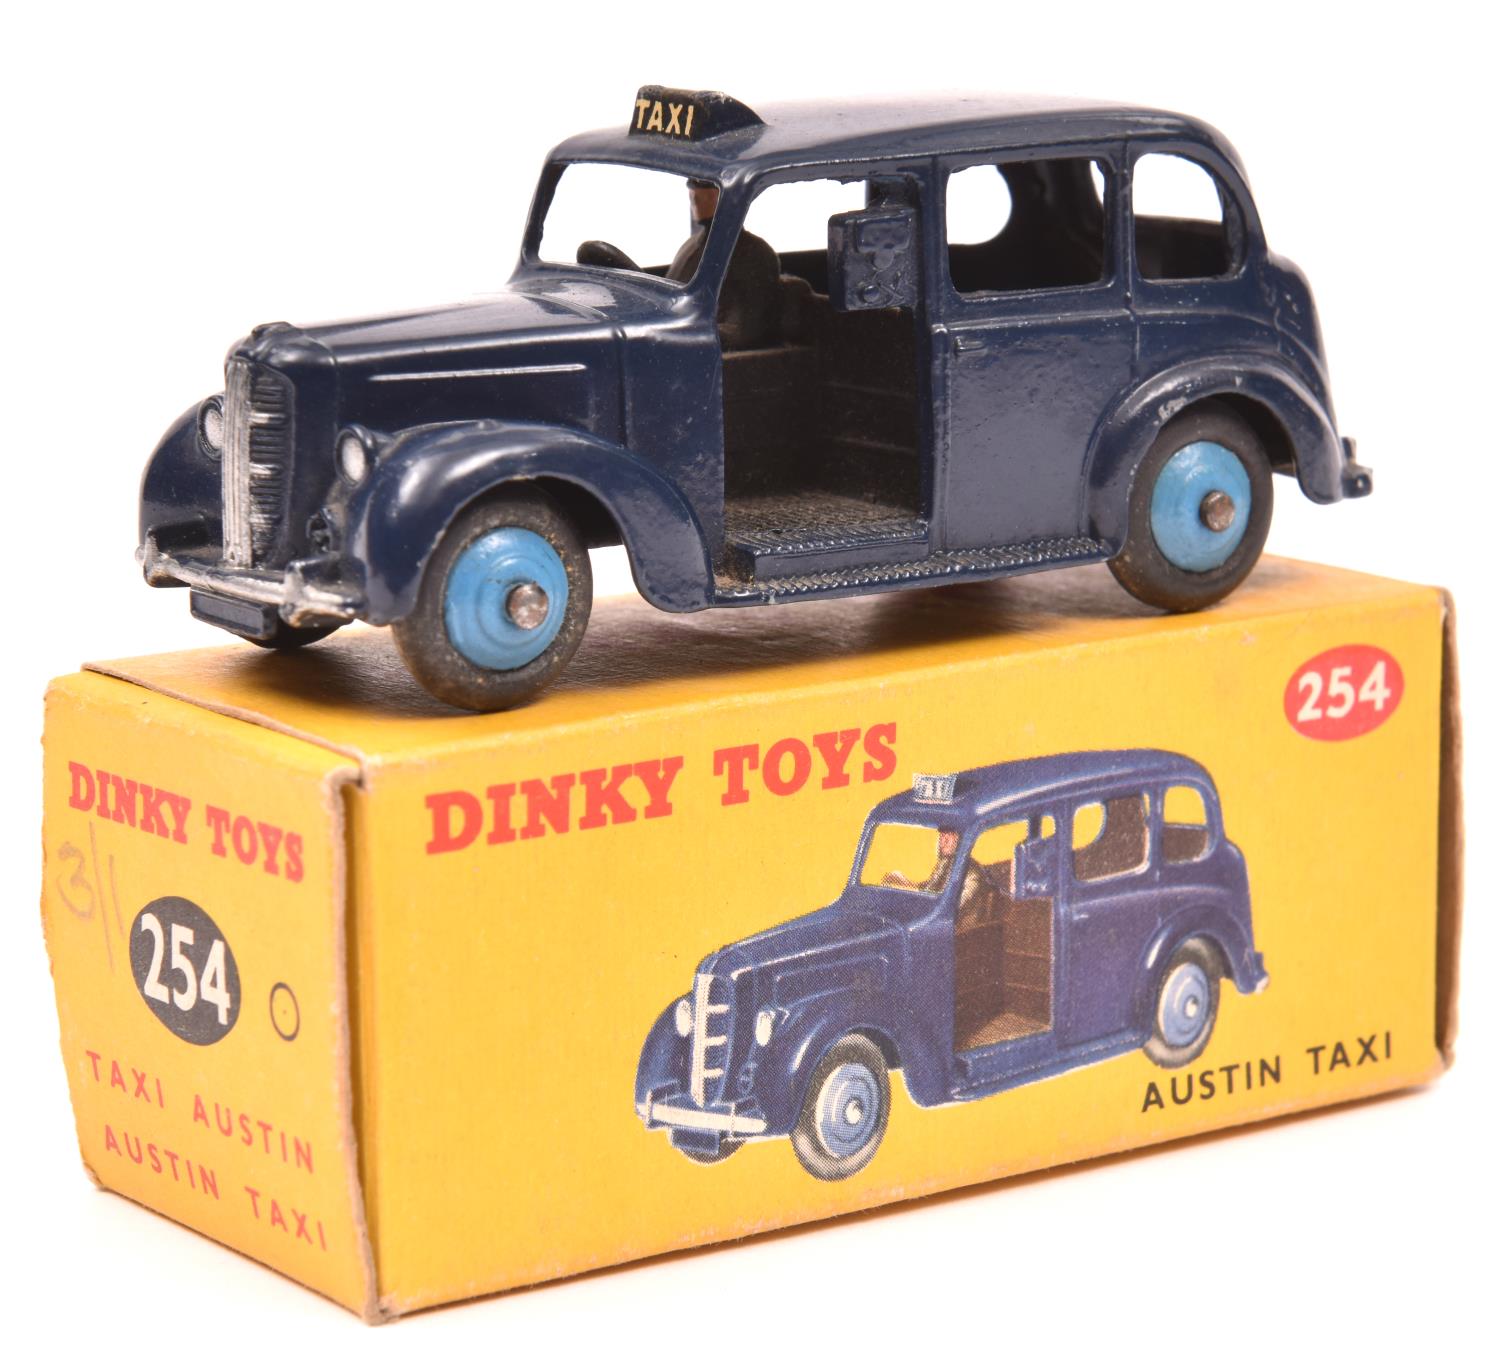 Dinky Toys Austin Taxi (254). A scarce example in dark blue with mid blue wheels and black tyres.